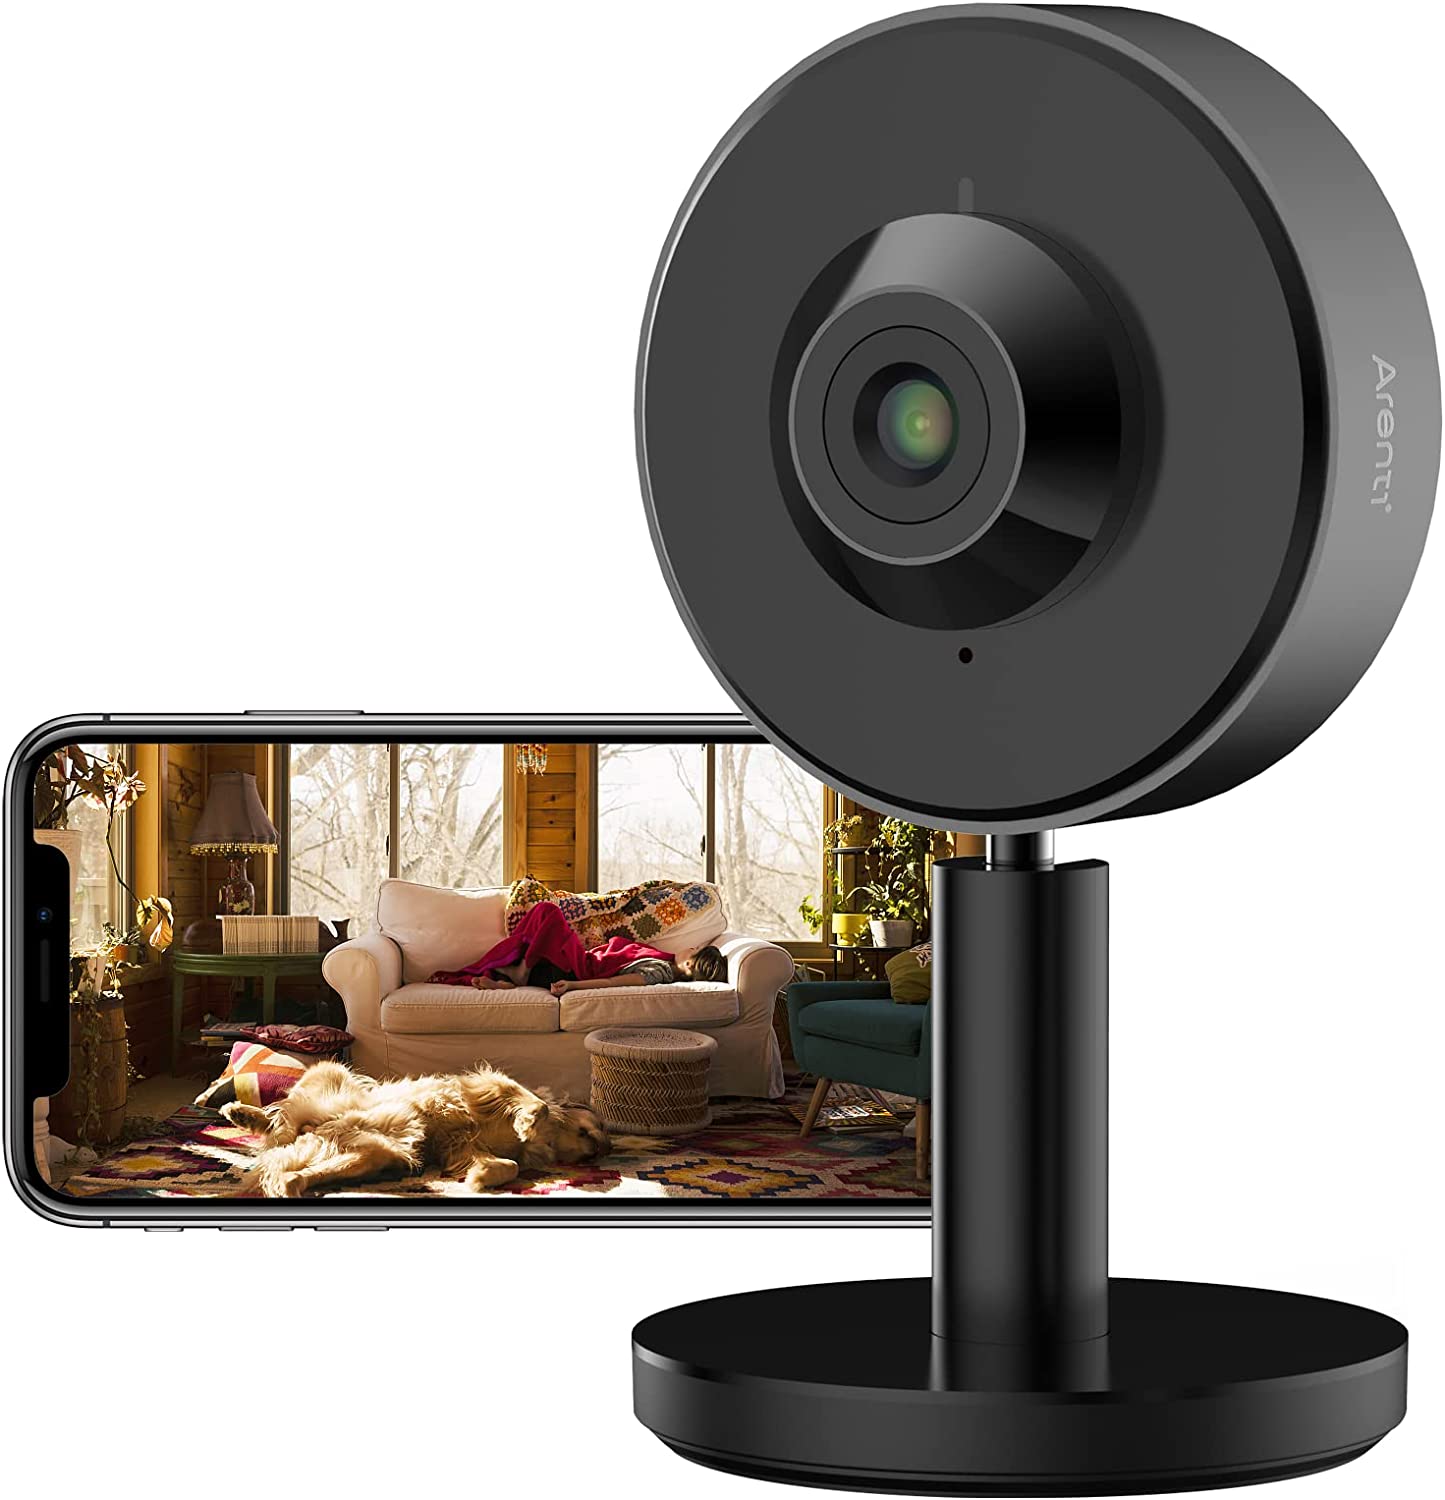 ARENTI Indoor Security Camera INDOOR1, 2K/3MP, 2.4G Wi-Fi, Privacy Mode, Works with Alexa & Google Assistant, Customizable AI Motion Detection Zones , Sound Detection, Two-Way Audio, Night Vision